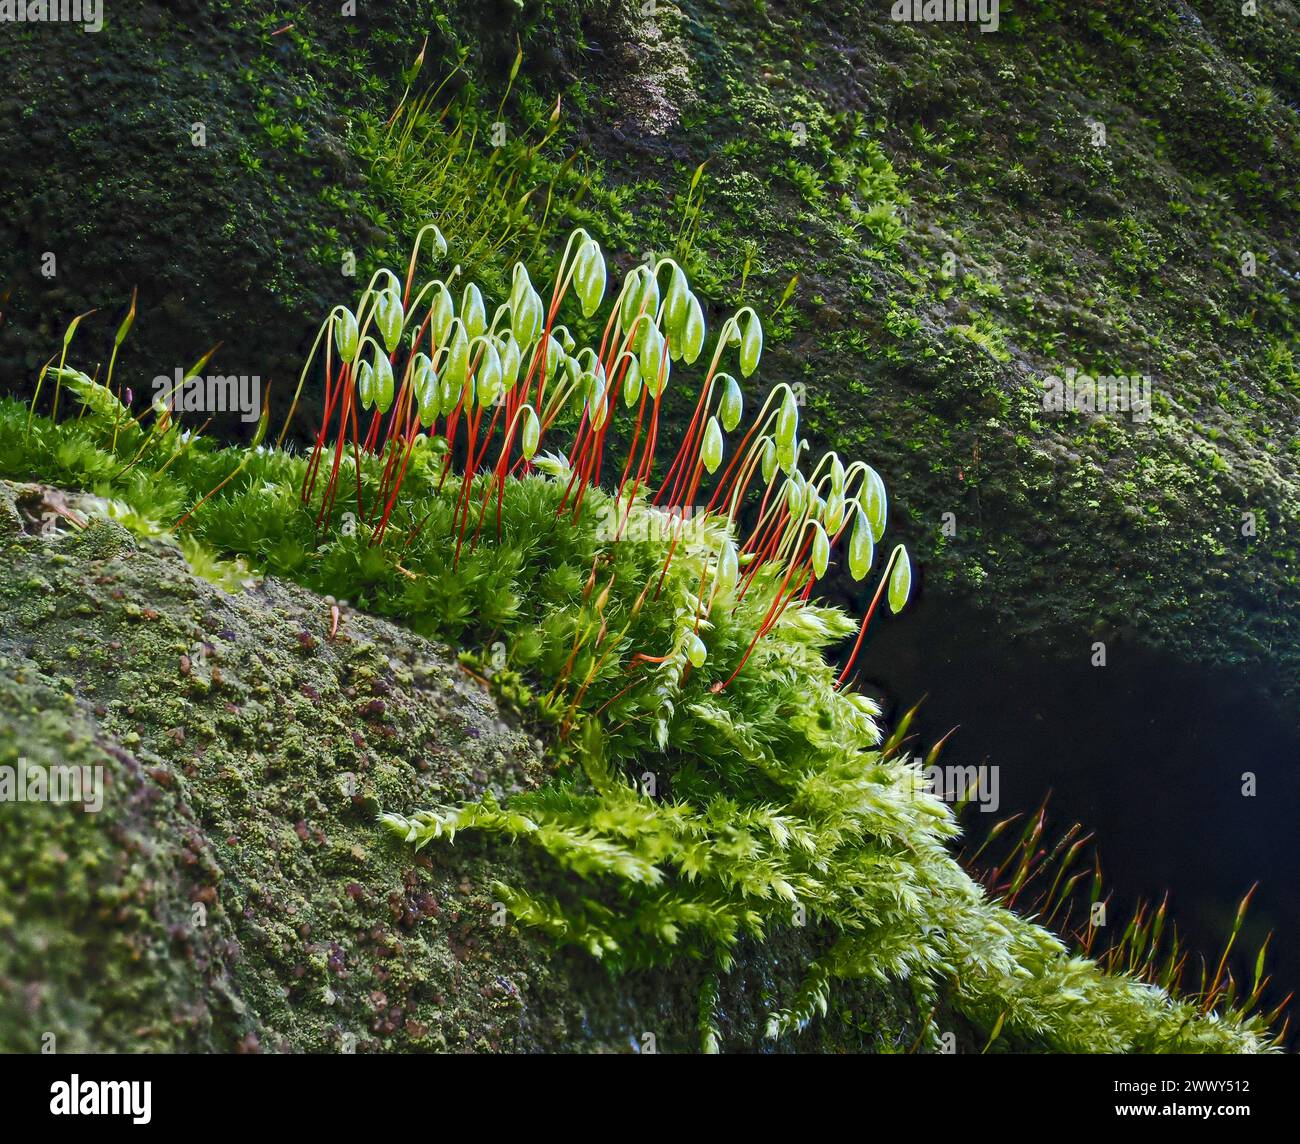 Shiny nodding capsules and red stalks of the moss Pohlia nutans on a damp Derbyshire stone wall UK Stock Photo